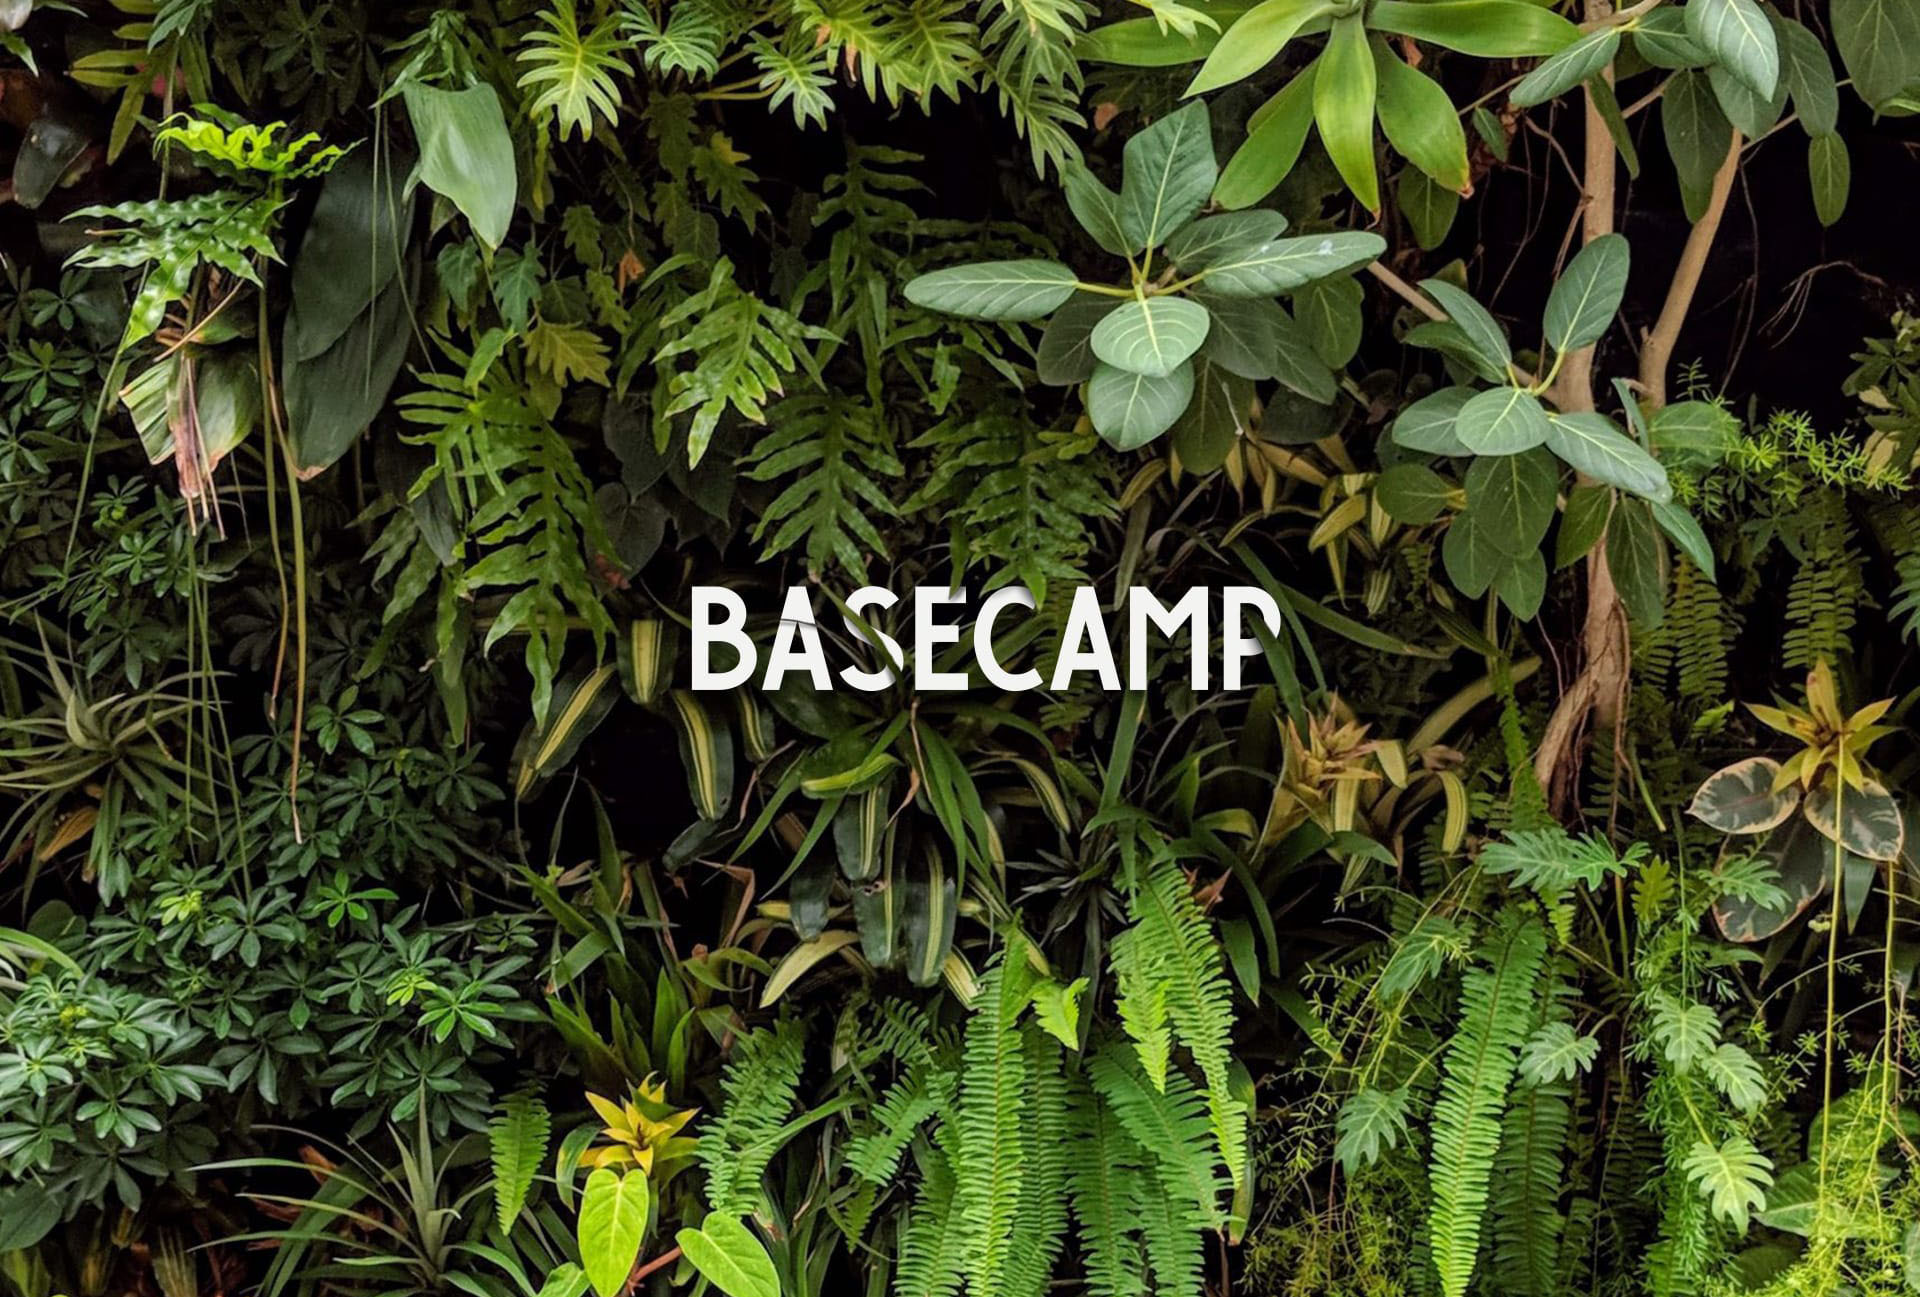 Large wall covered in various tropical green plants with the word "basecamp" place in the middle